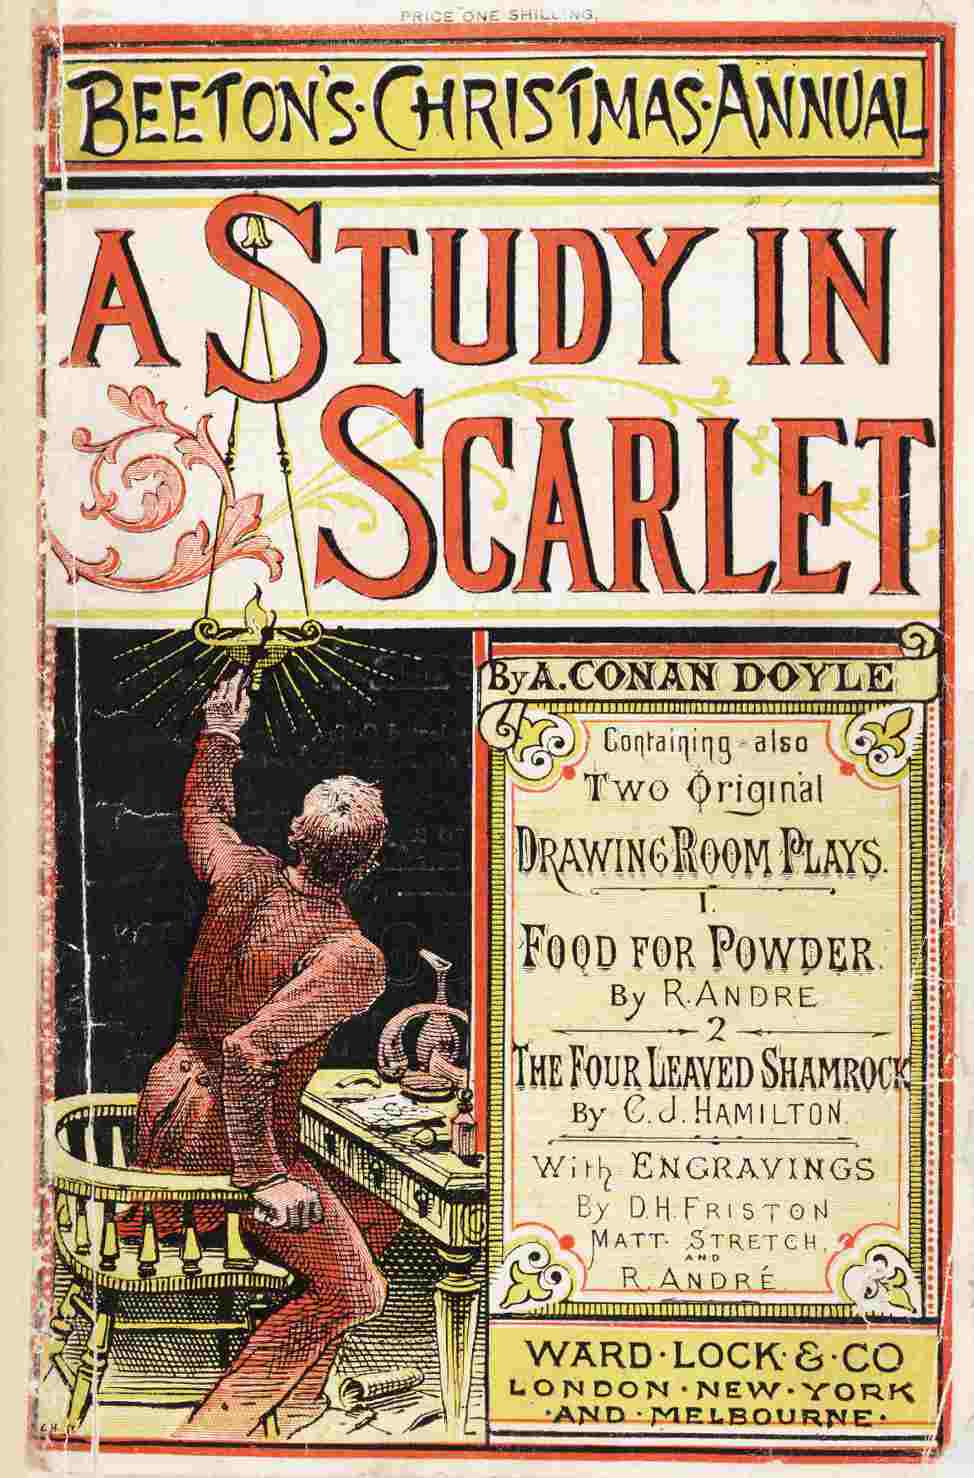 The first published Holmes story